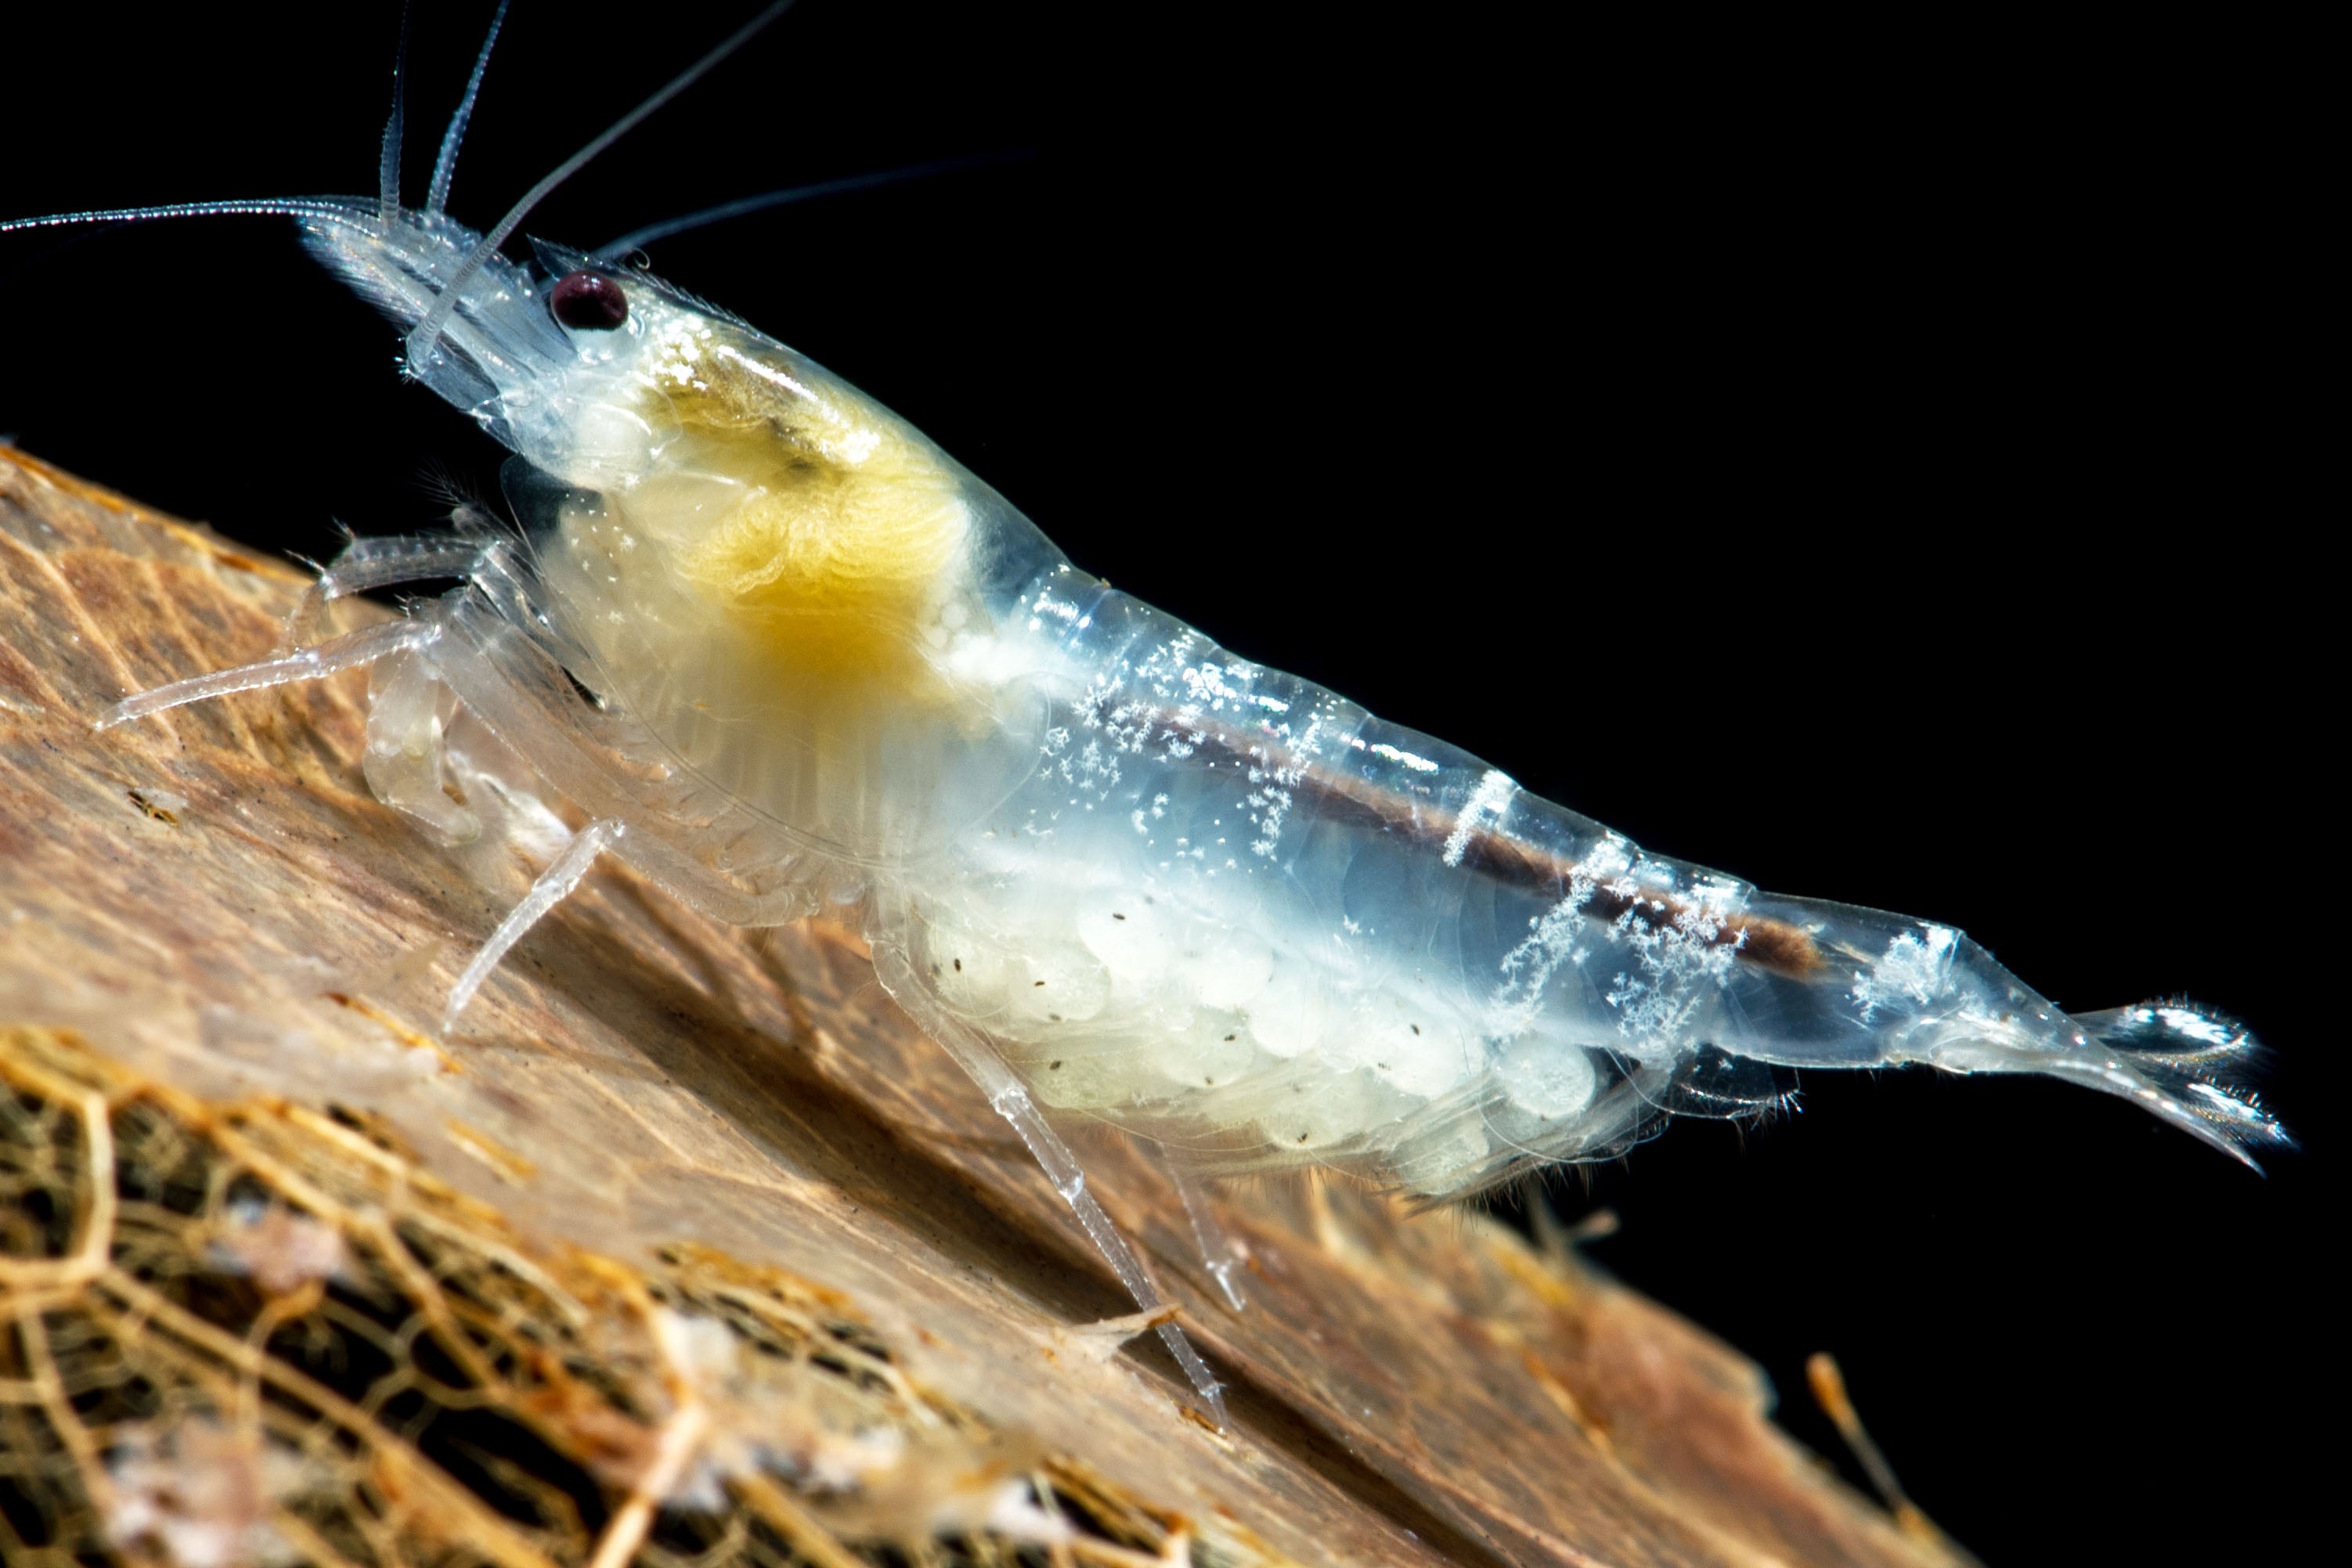 How to Breed Freshwater Shrimp?